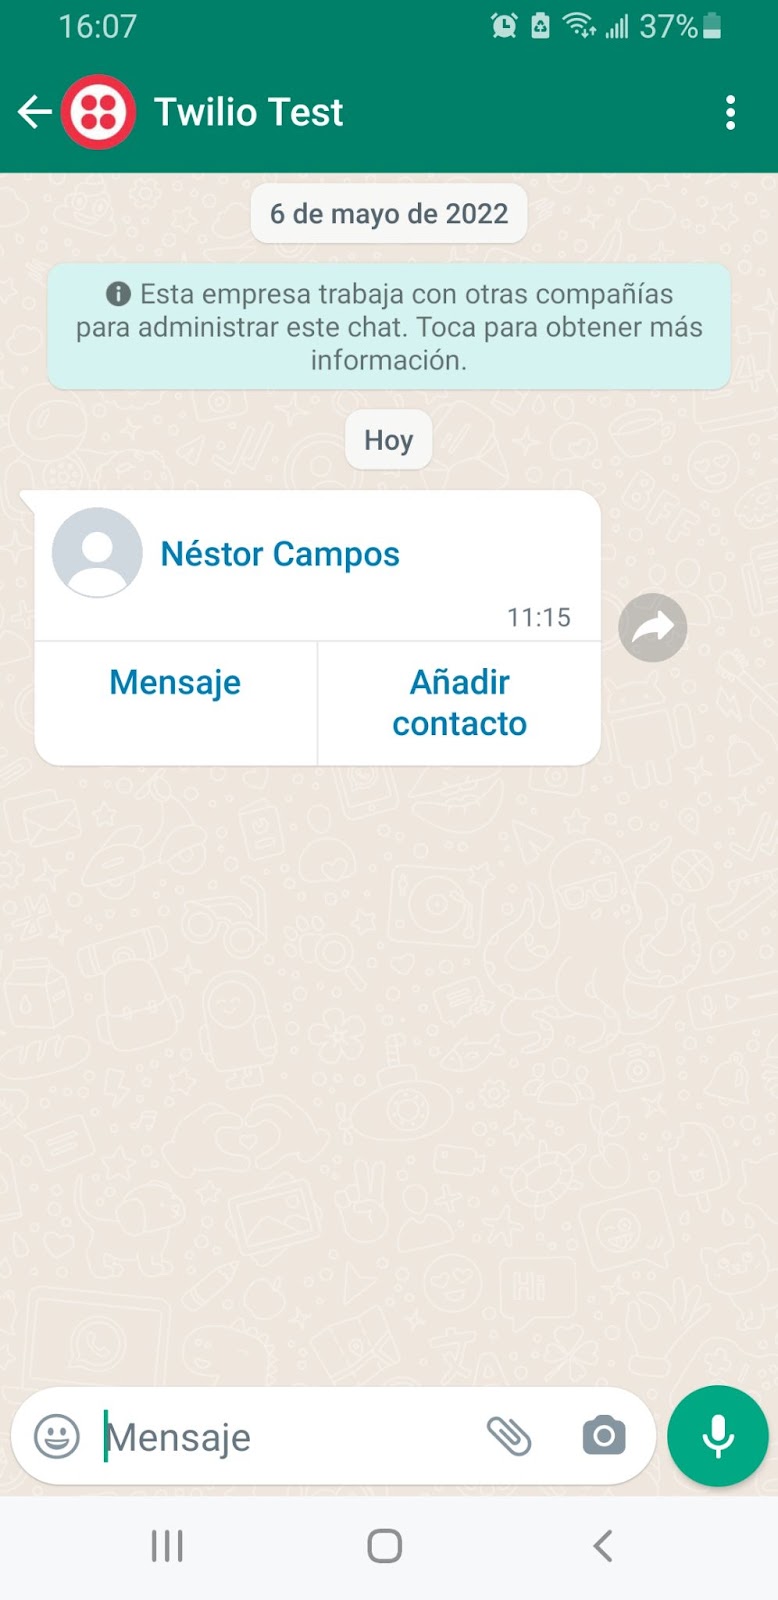 WhatsApp message received with the Twilio Sandbox number. The Sandbox sent a message with the contact information using a vCard format.